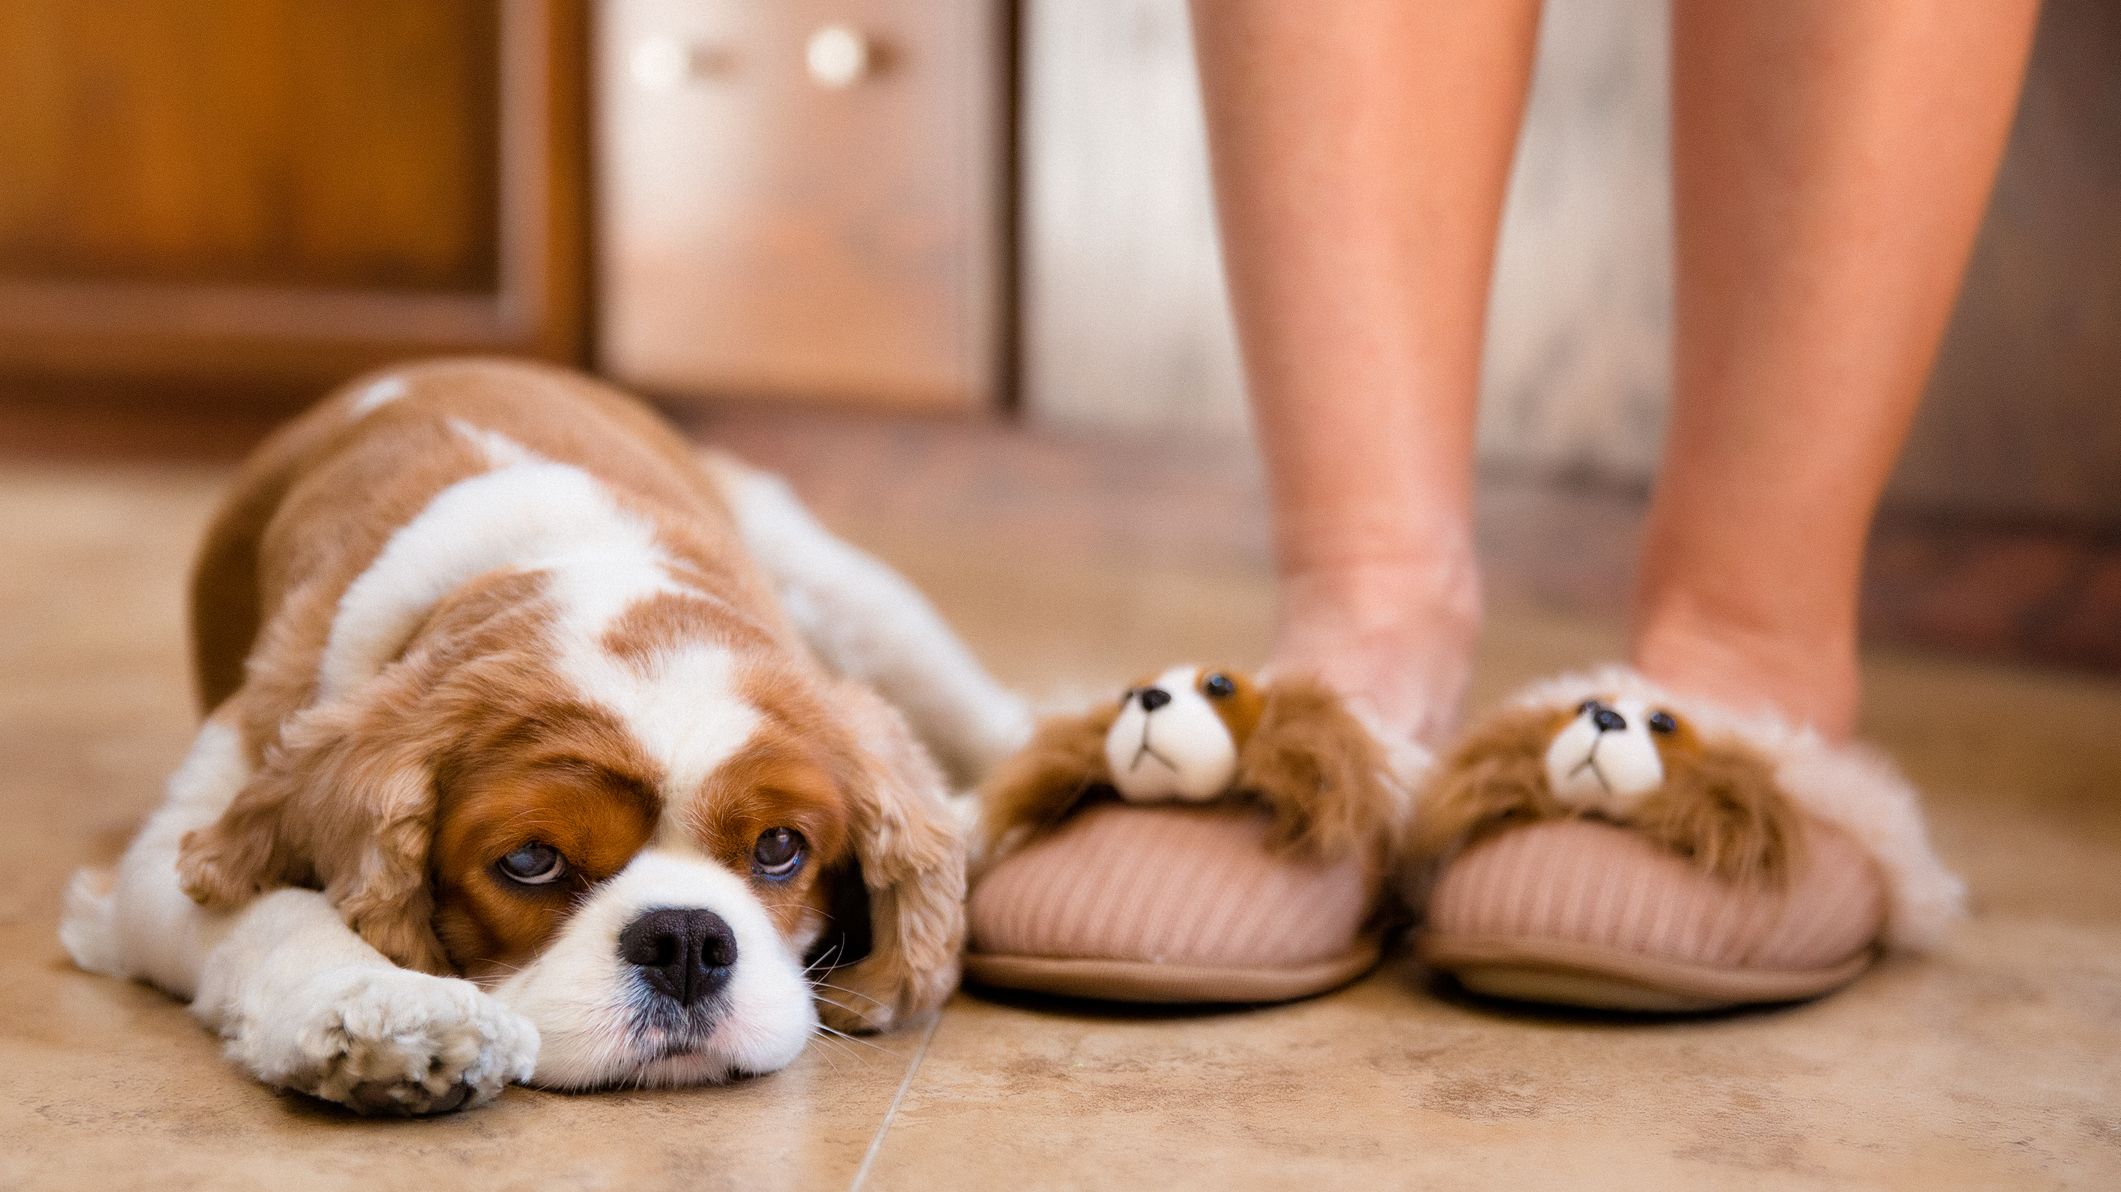 22 Unusual Slippers To Keep Your Feet 